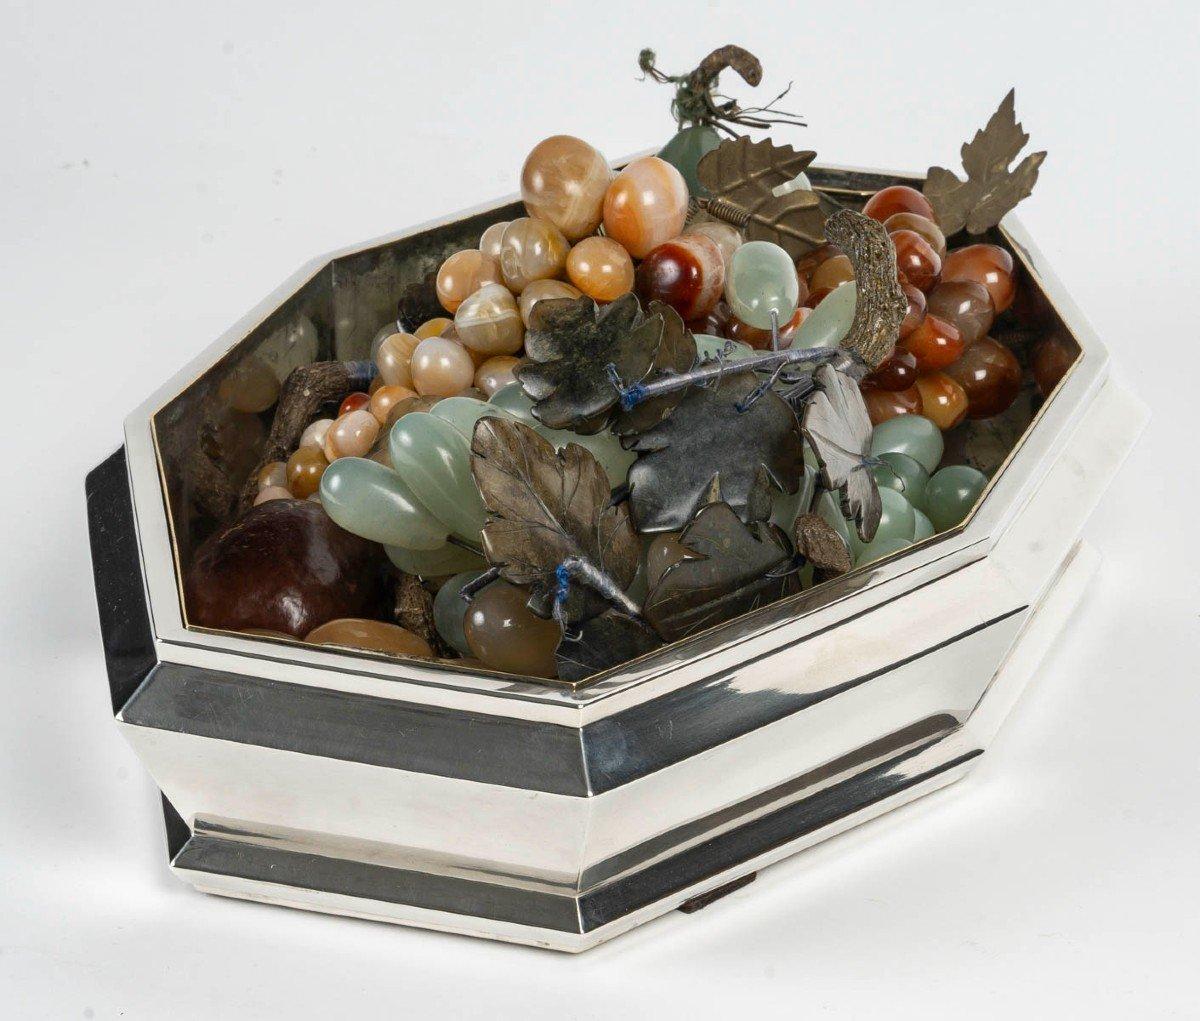 Goldsmith Ruys - Modernist Planter In Silver Metal Interior For Sale 4